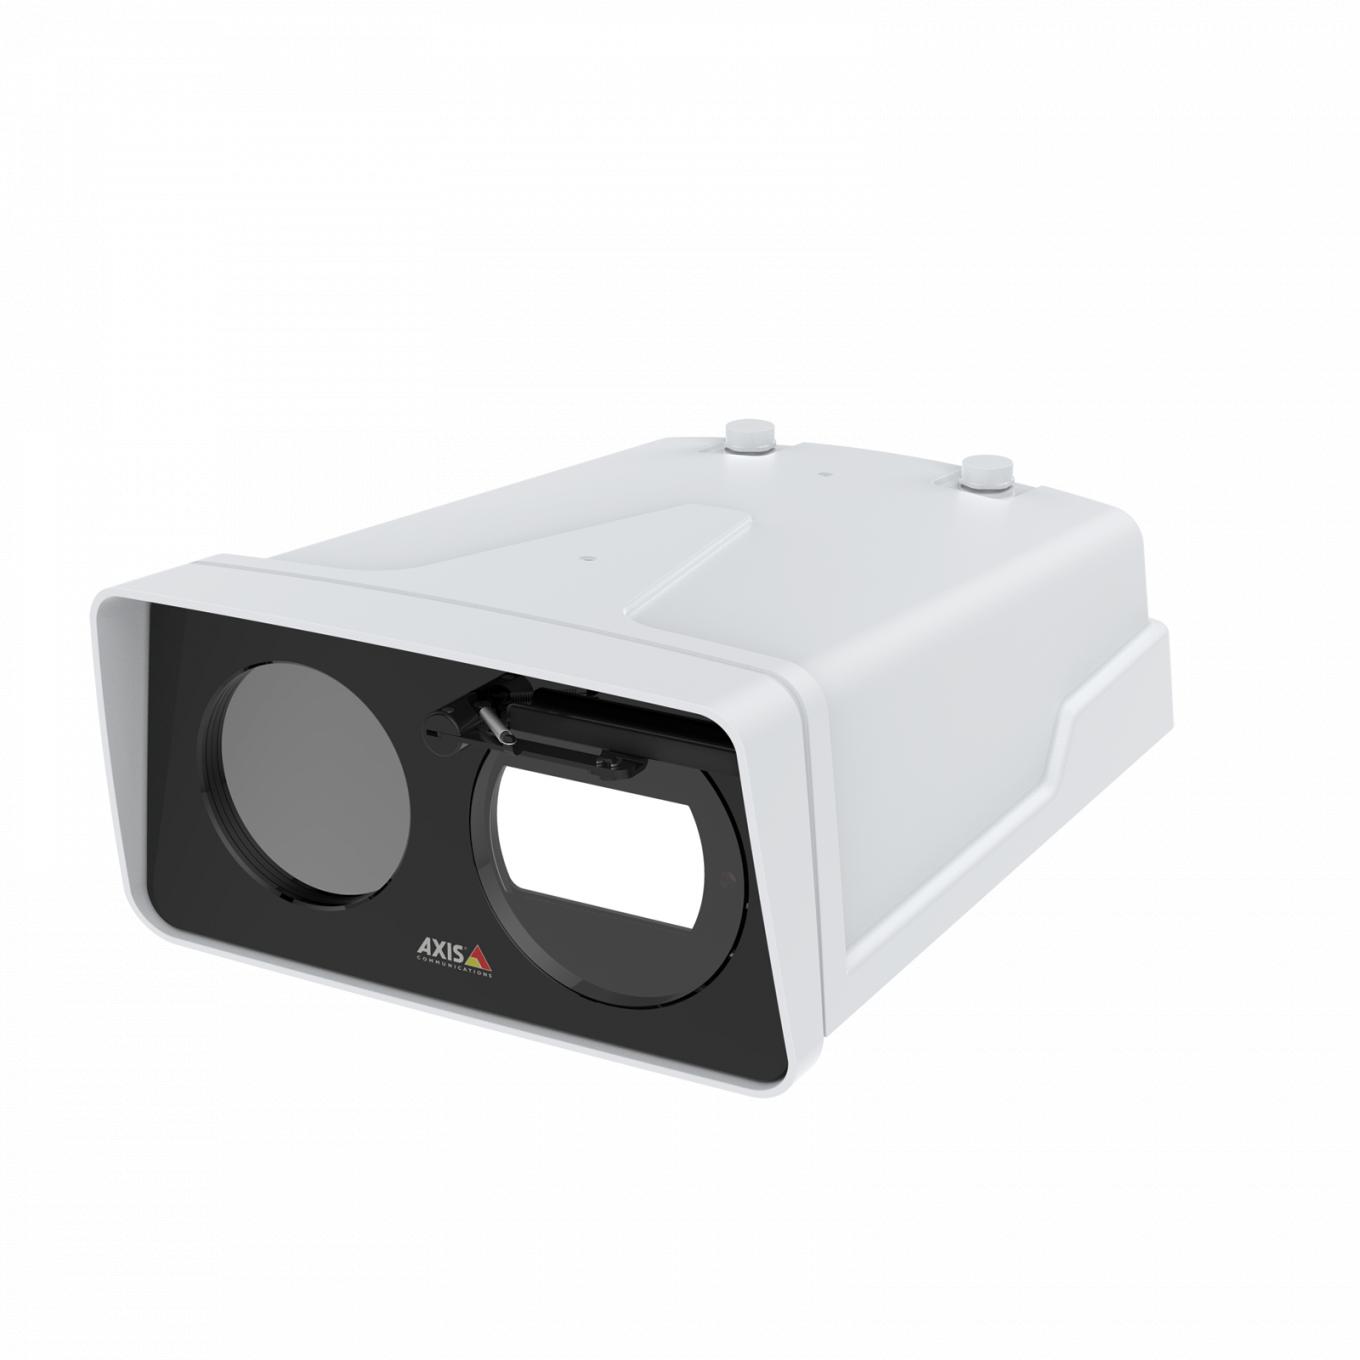 Product List - Projectors - Canon Philippines